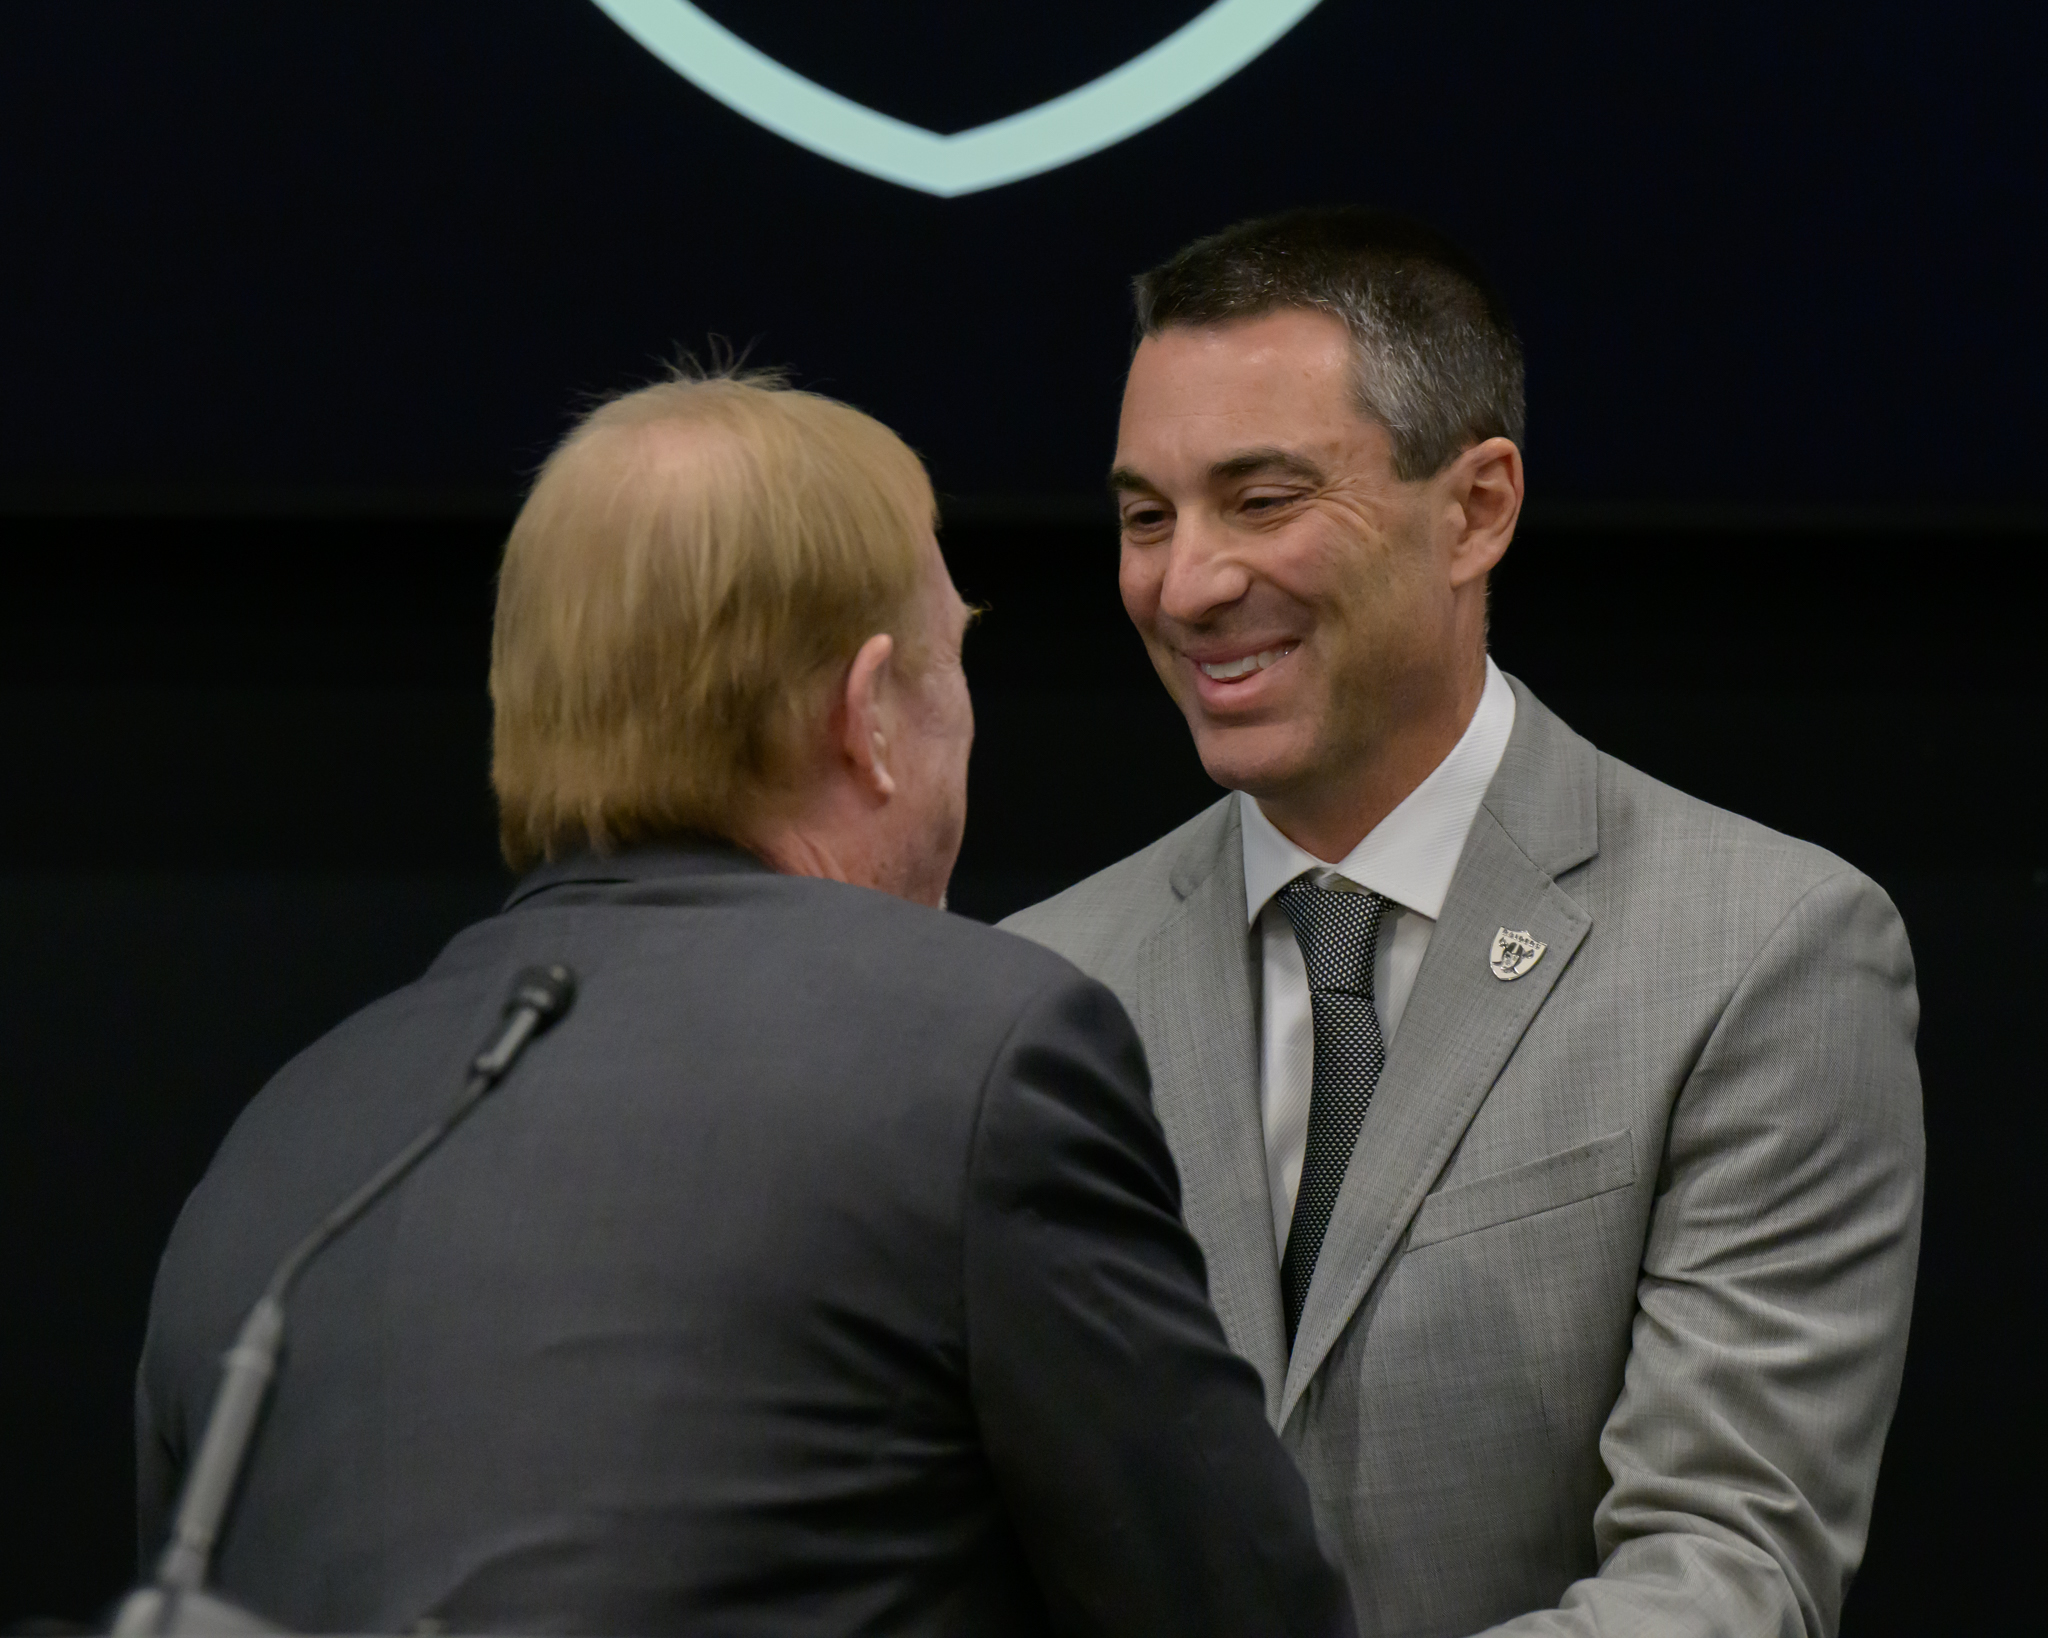 Tom Telesco will lead Mark Davis's Las Vegas Raiders with the influence of spending years with the Iconic Bill Polian.